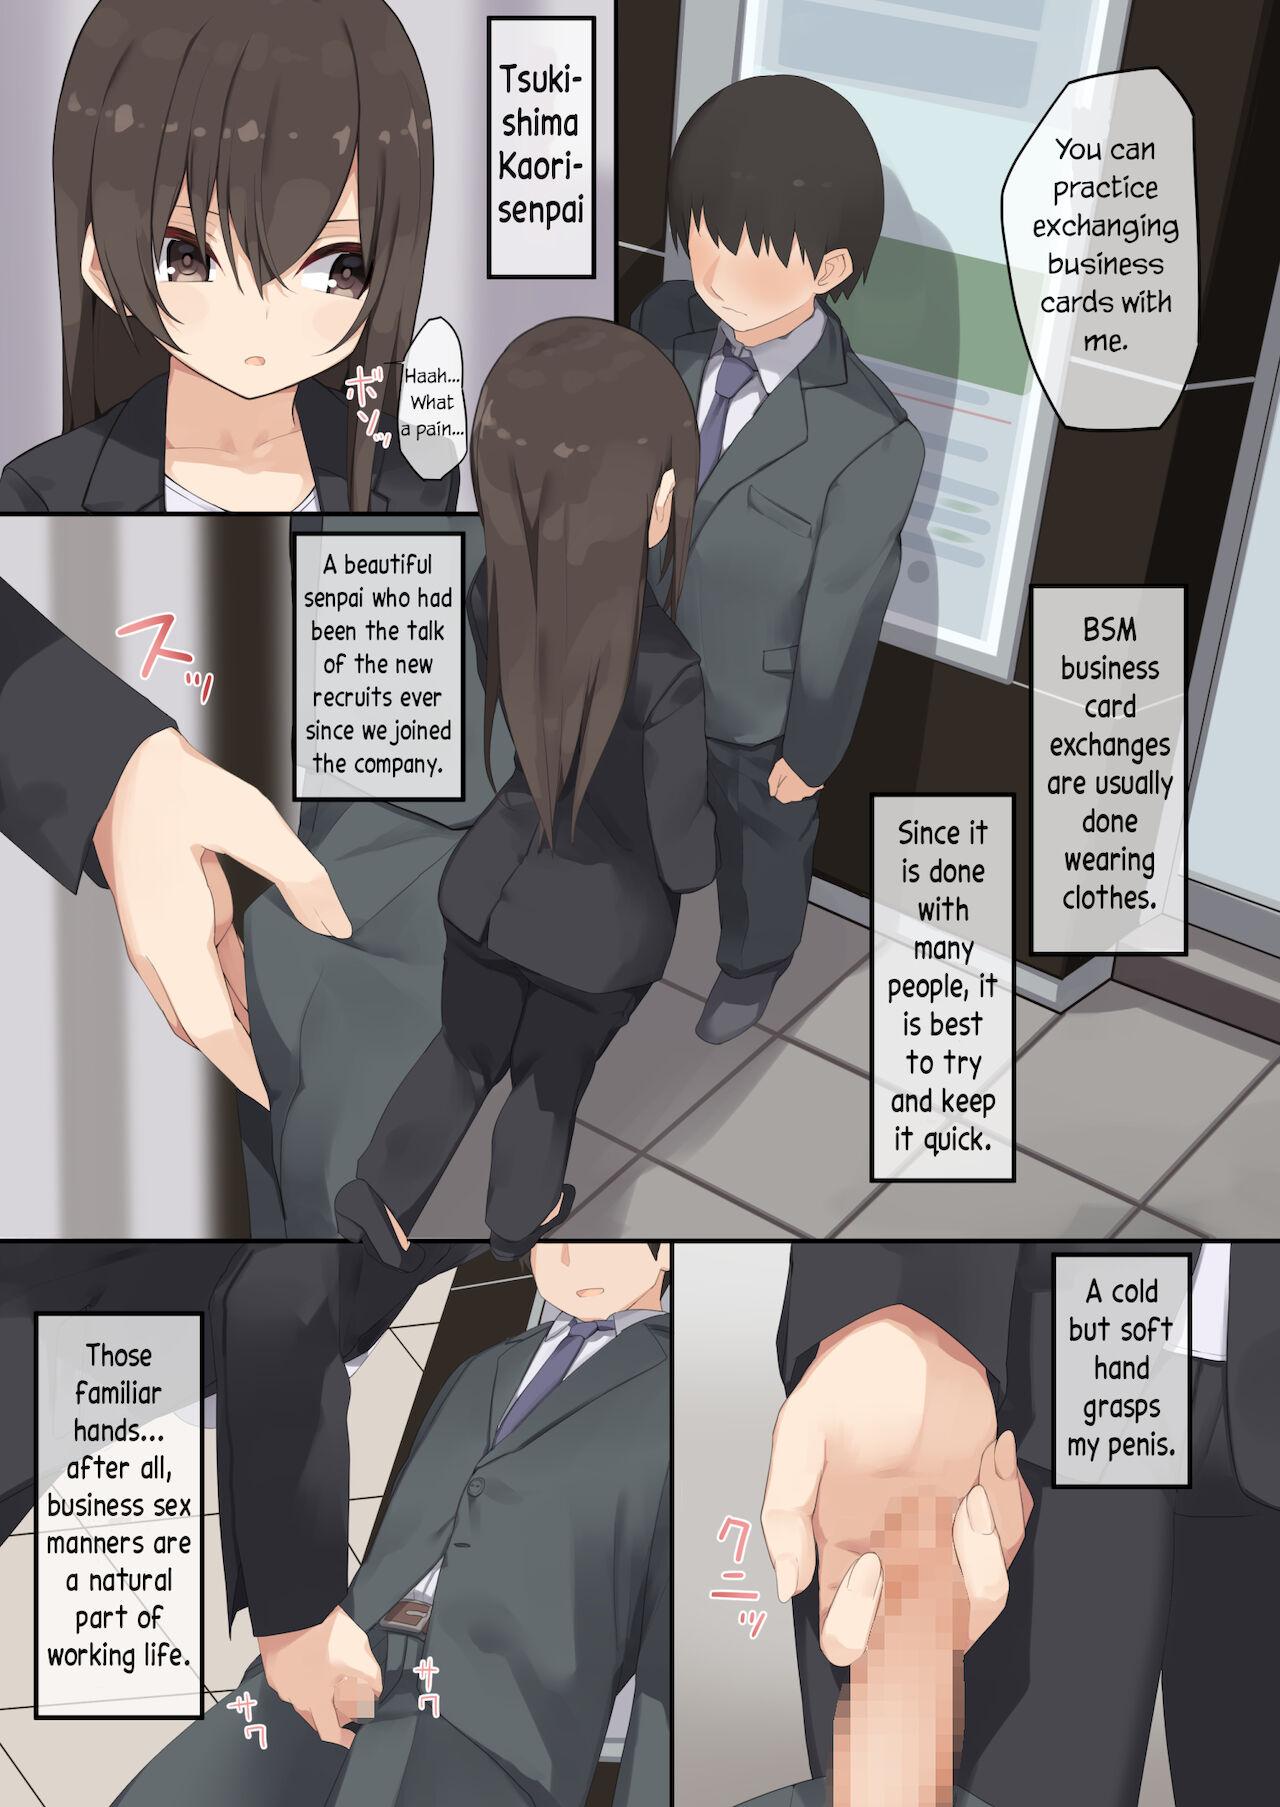 Sexy Whores Business Sex Manner Shinsotsu Hen | Business Sex Manners - Original Foda - Page 9